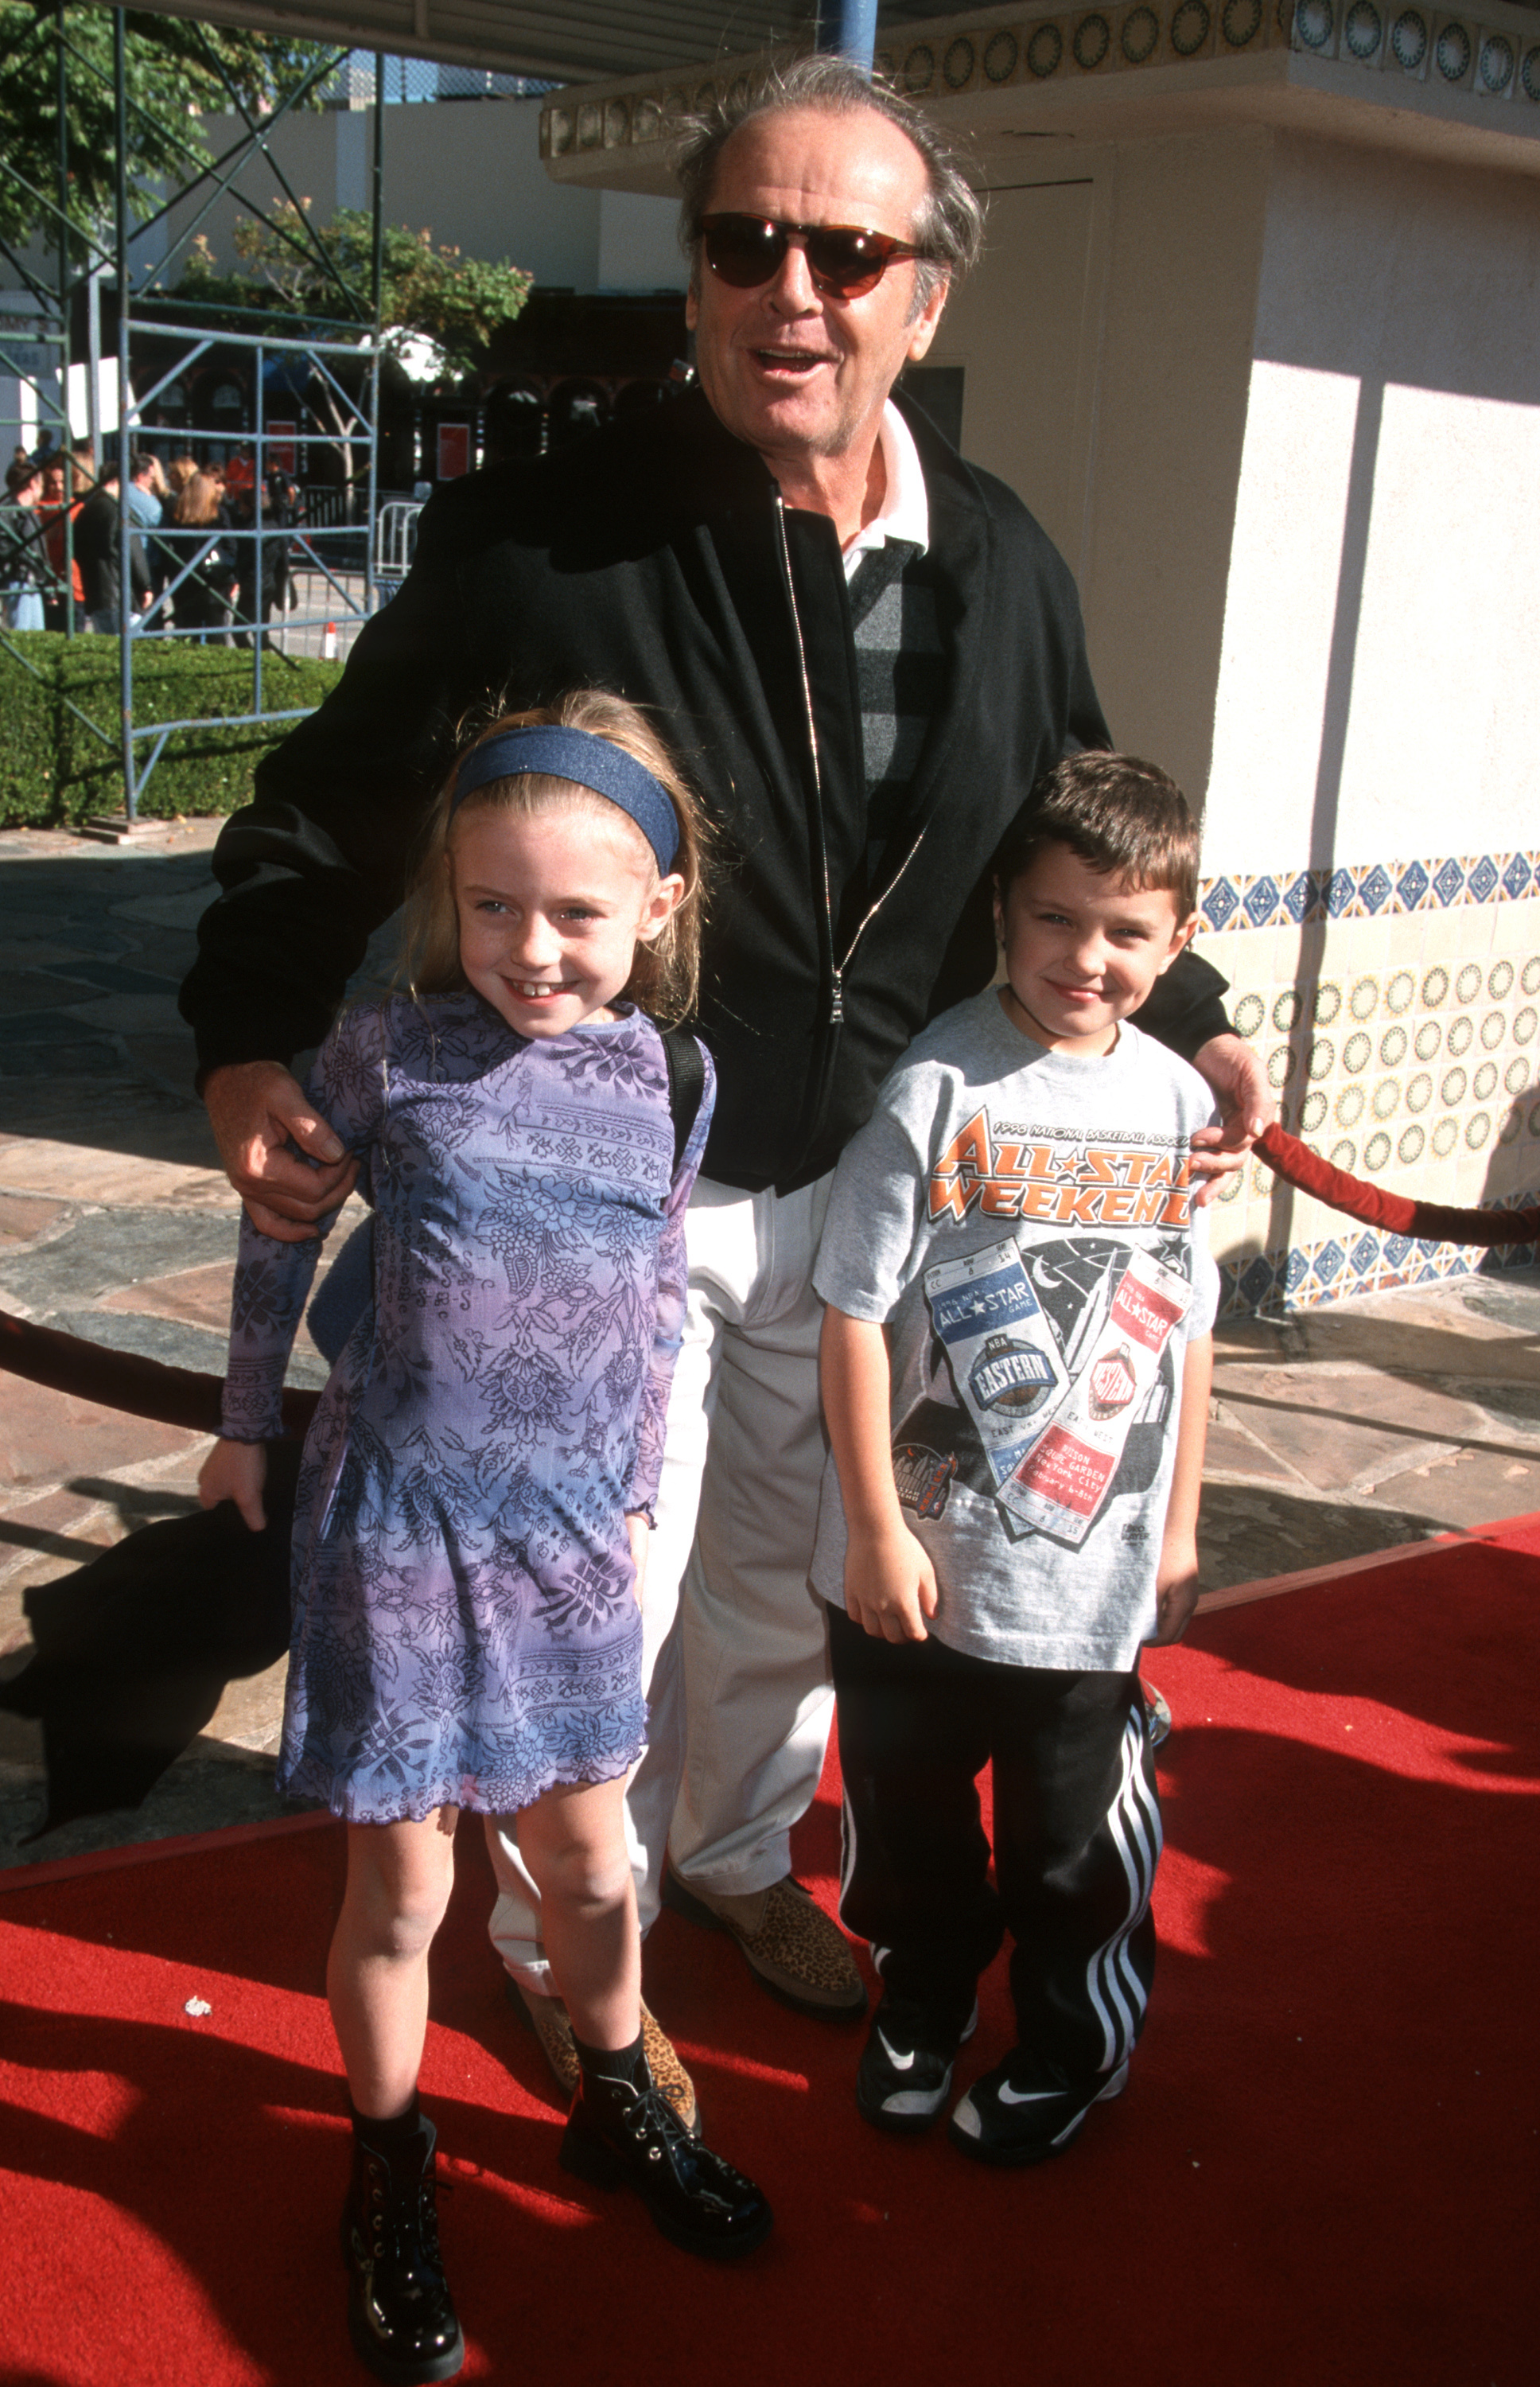 Jack Nicholson and his kids Lorraine and Raymond in California in 1998 | Source: Getty Images